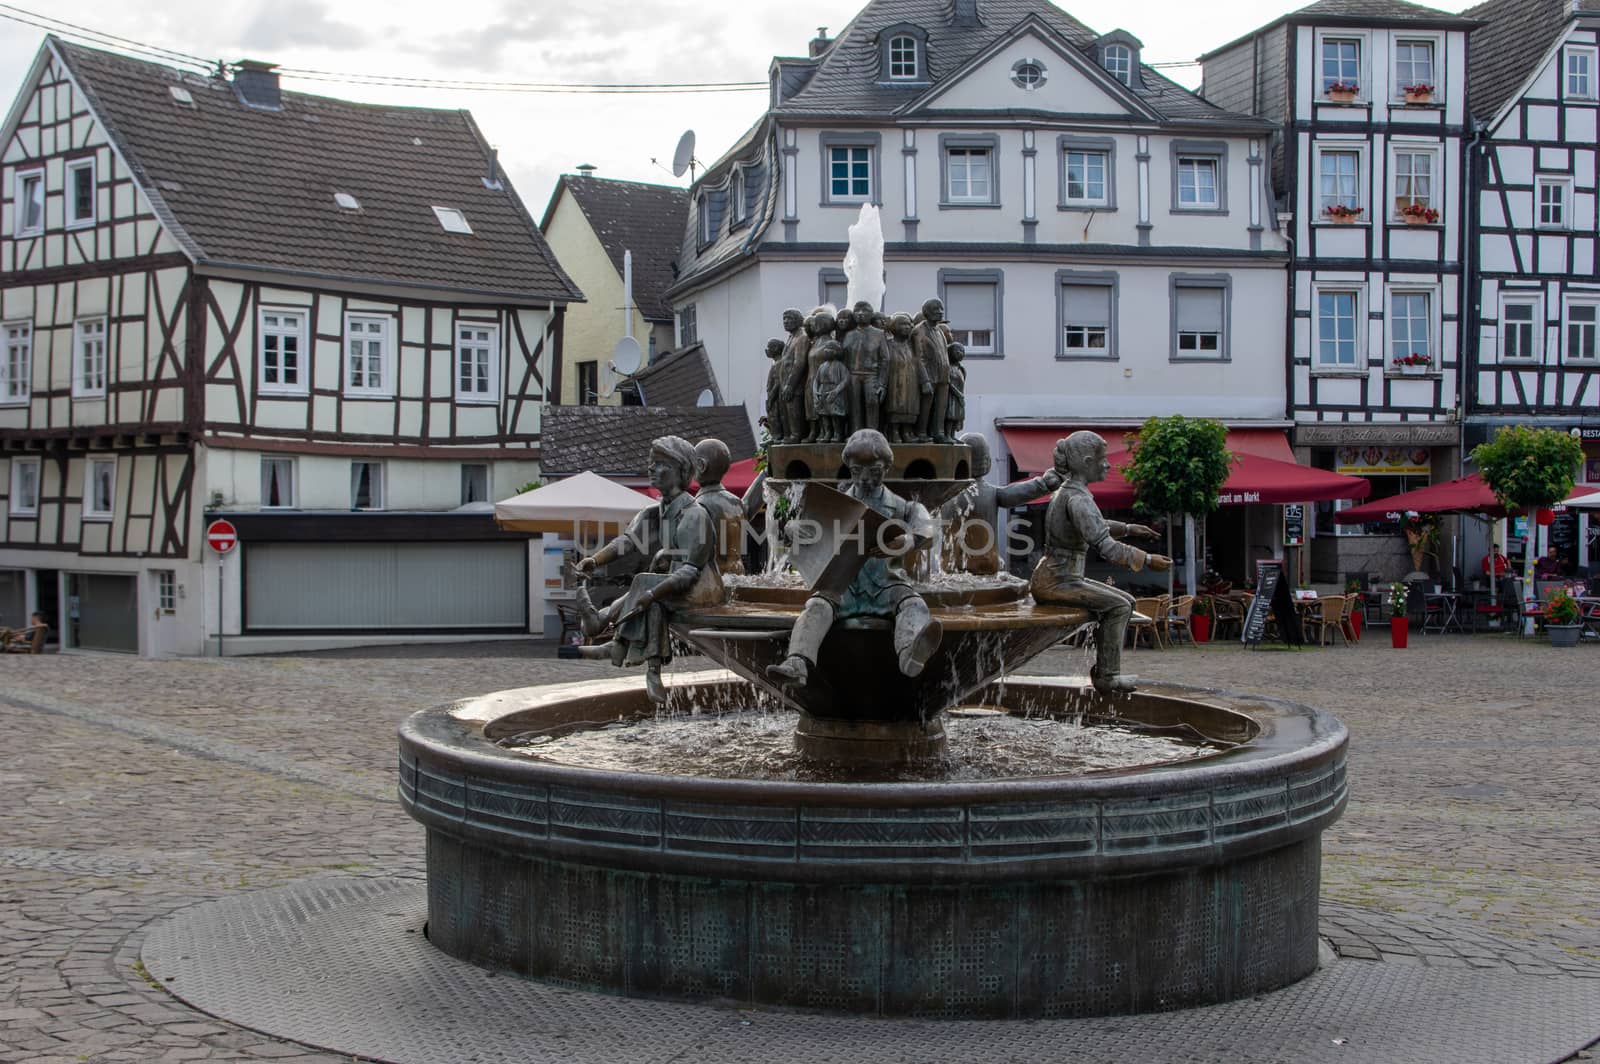 Council Fountain (Ratsbrunnen) in Linz on the Rhine. full view by MarcoWarm